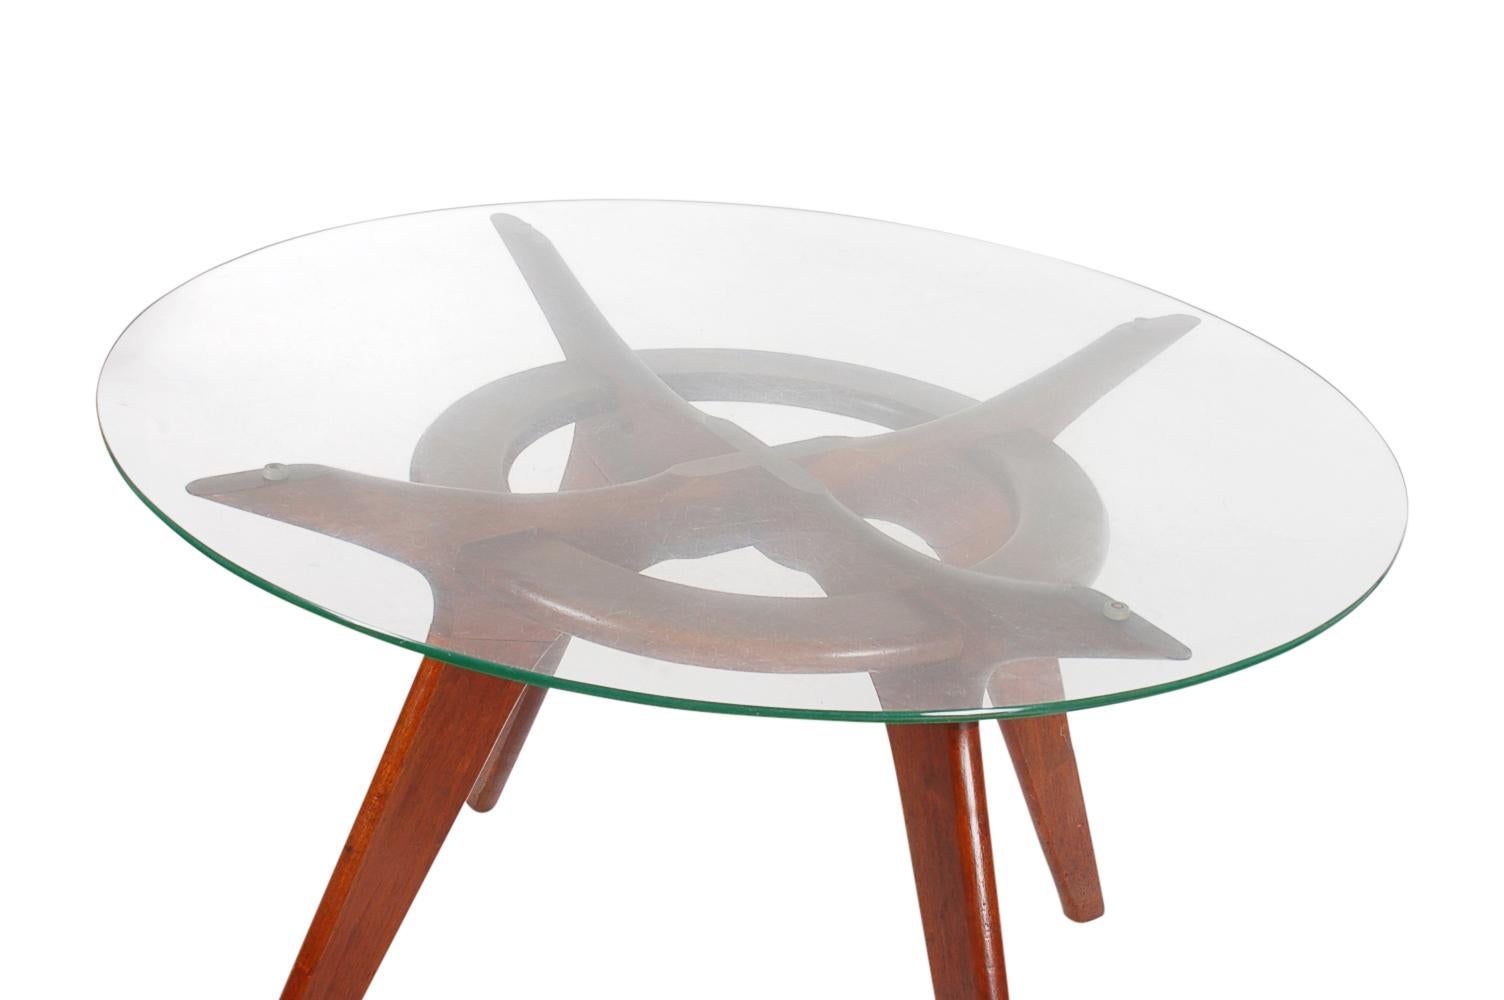 American Mid-Century Modern Adrian Pearsall Sculptural Dining Table in Walnut and Glass